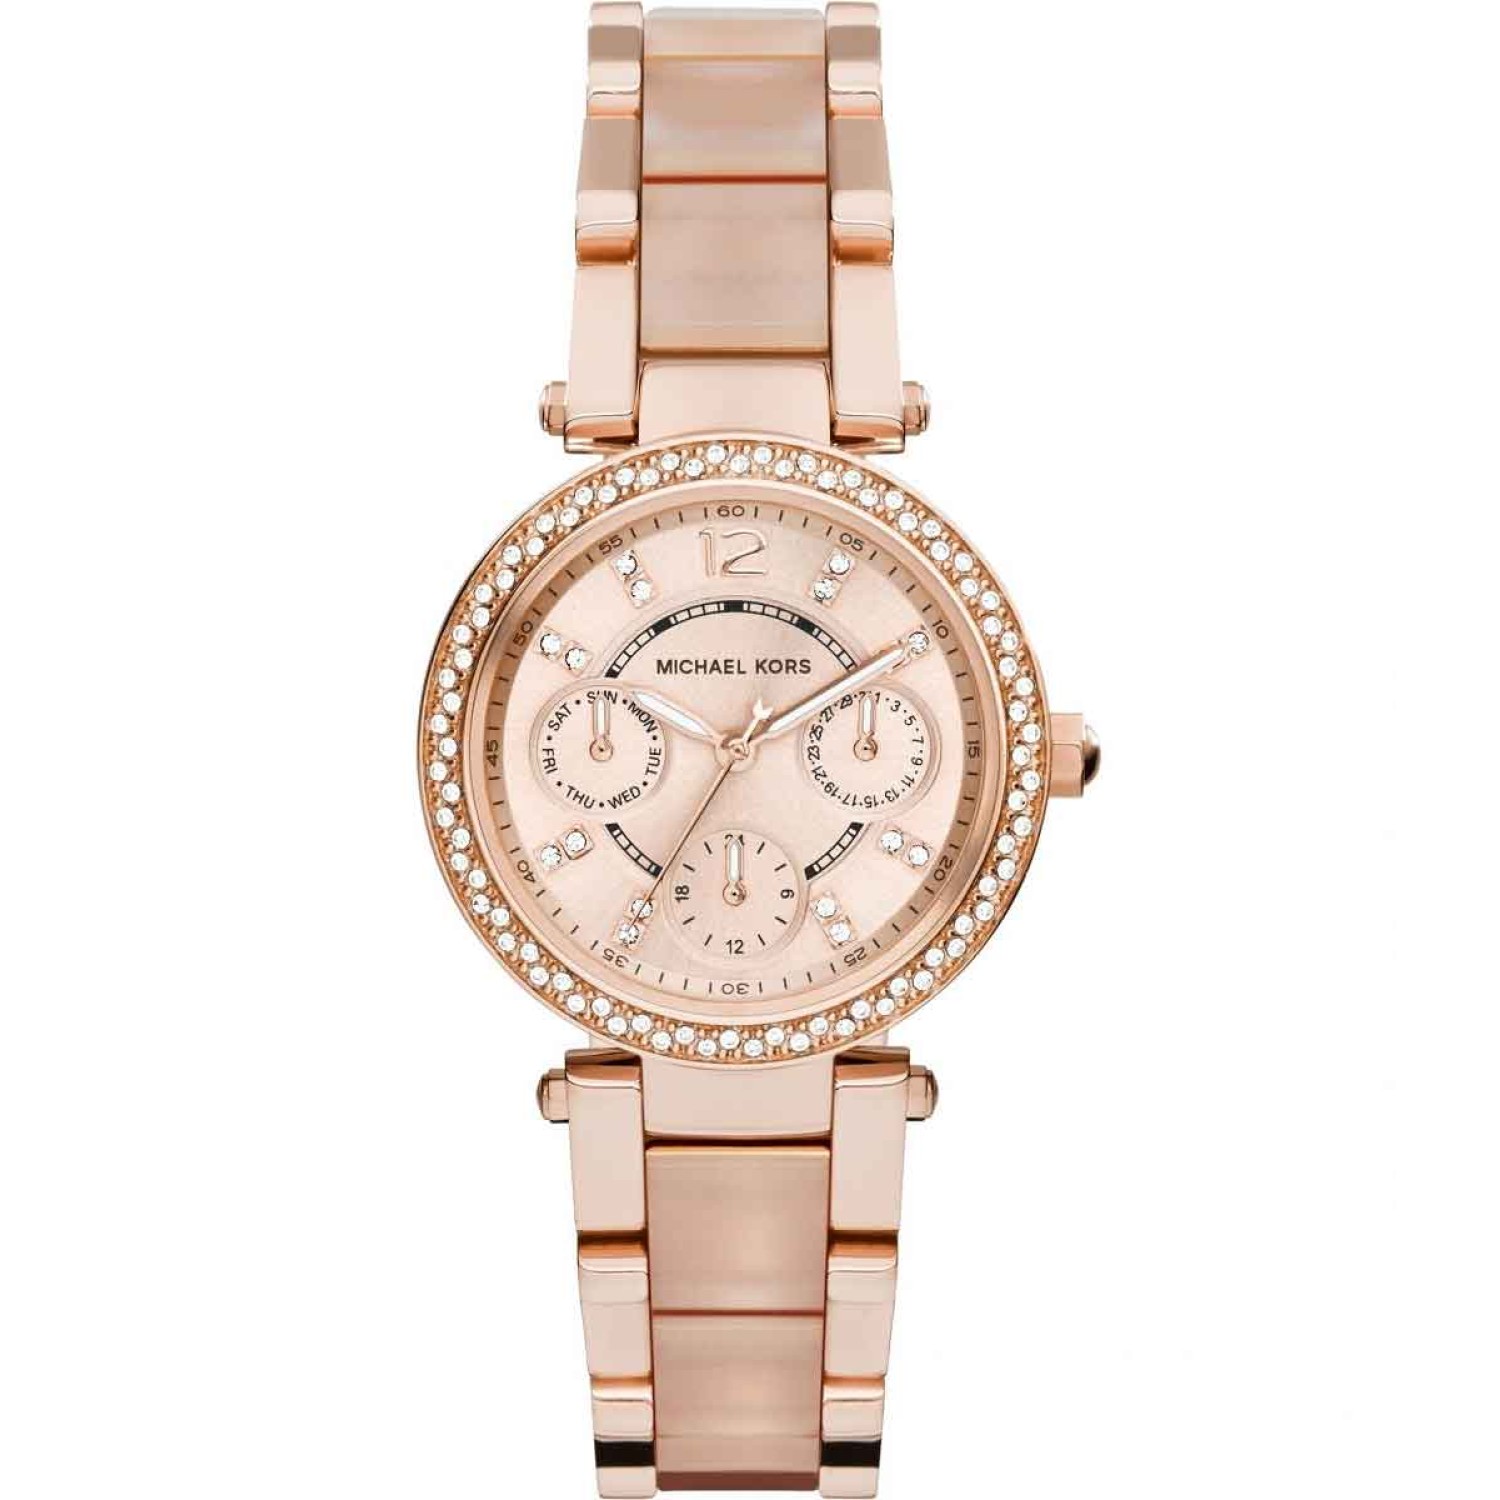 MK6110 Michael Kors Mini Parker Rose Tone Watch. Featuring romantic rose gold-tone stainless steel, a sparkling pavé topring and a chic sunray dial, this Michael Kors timepiece gives new meaning to the term -pretty in pink.OXIPAY - Have it now and pay ove